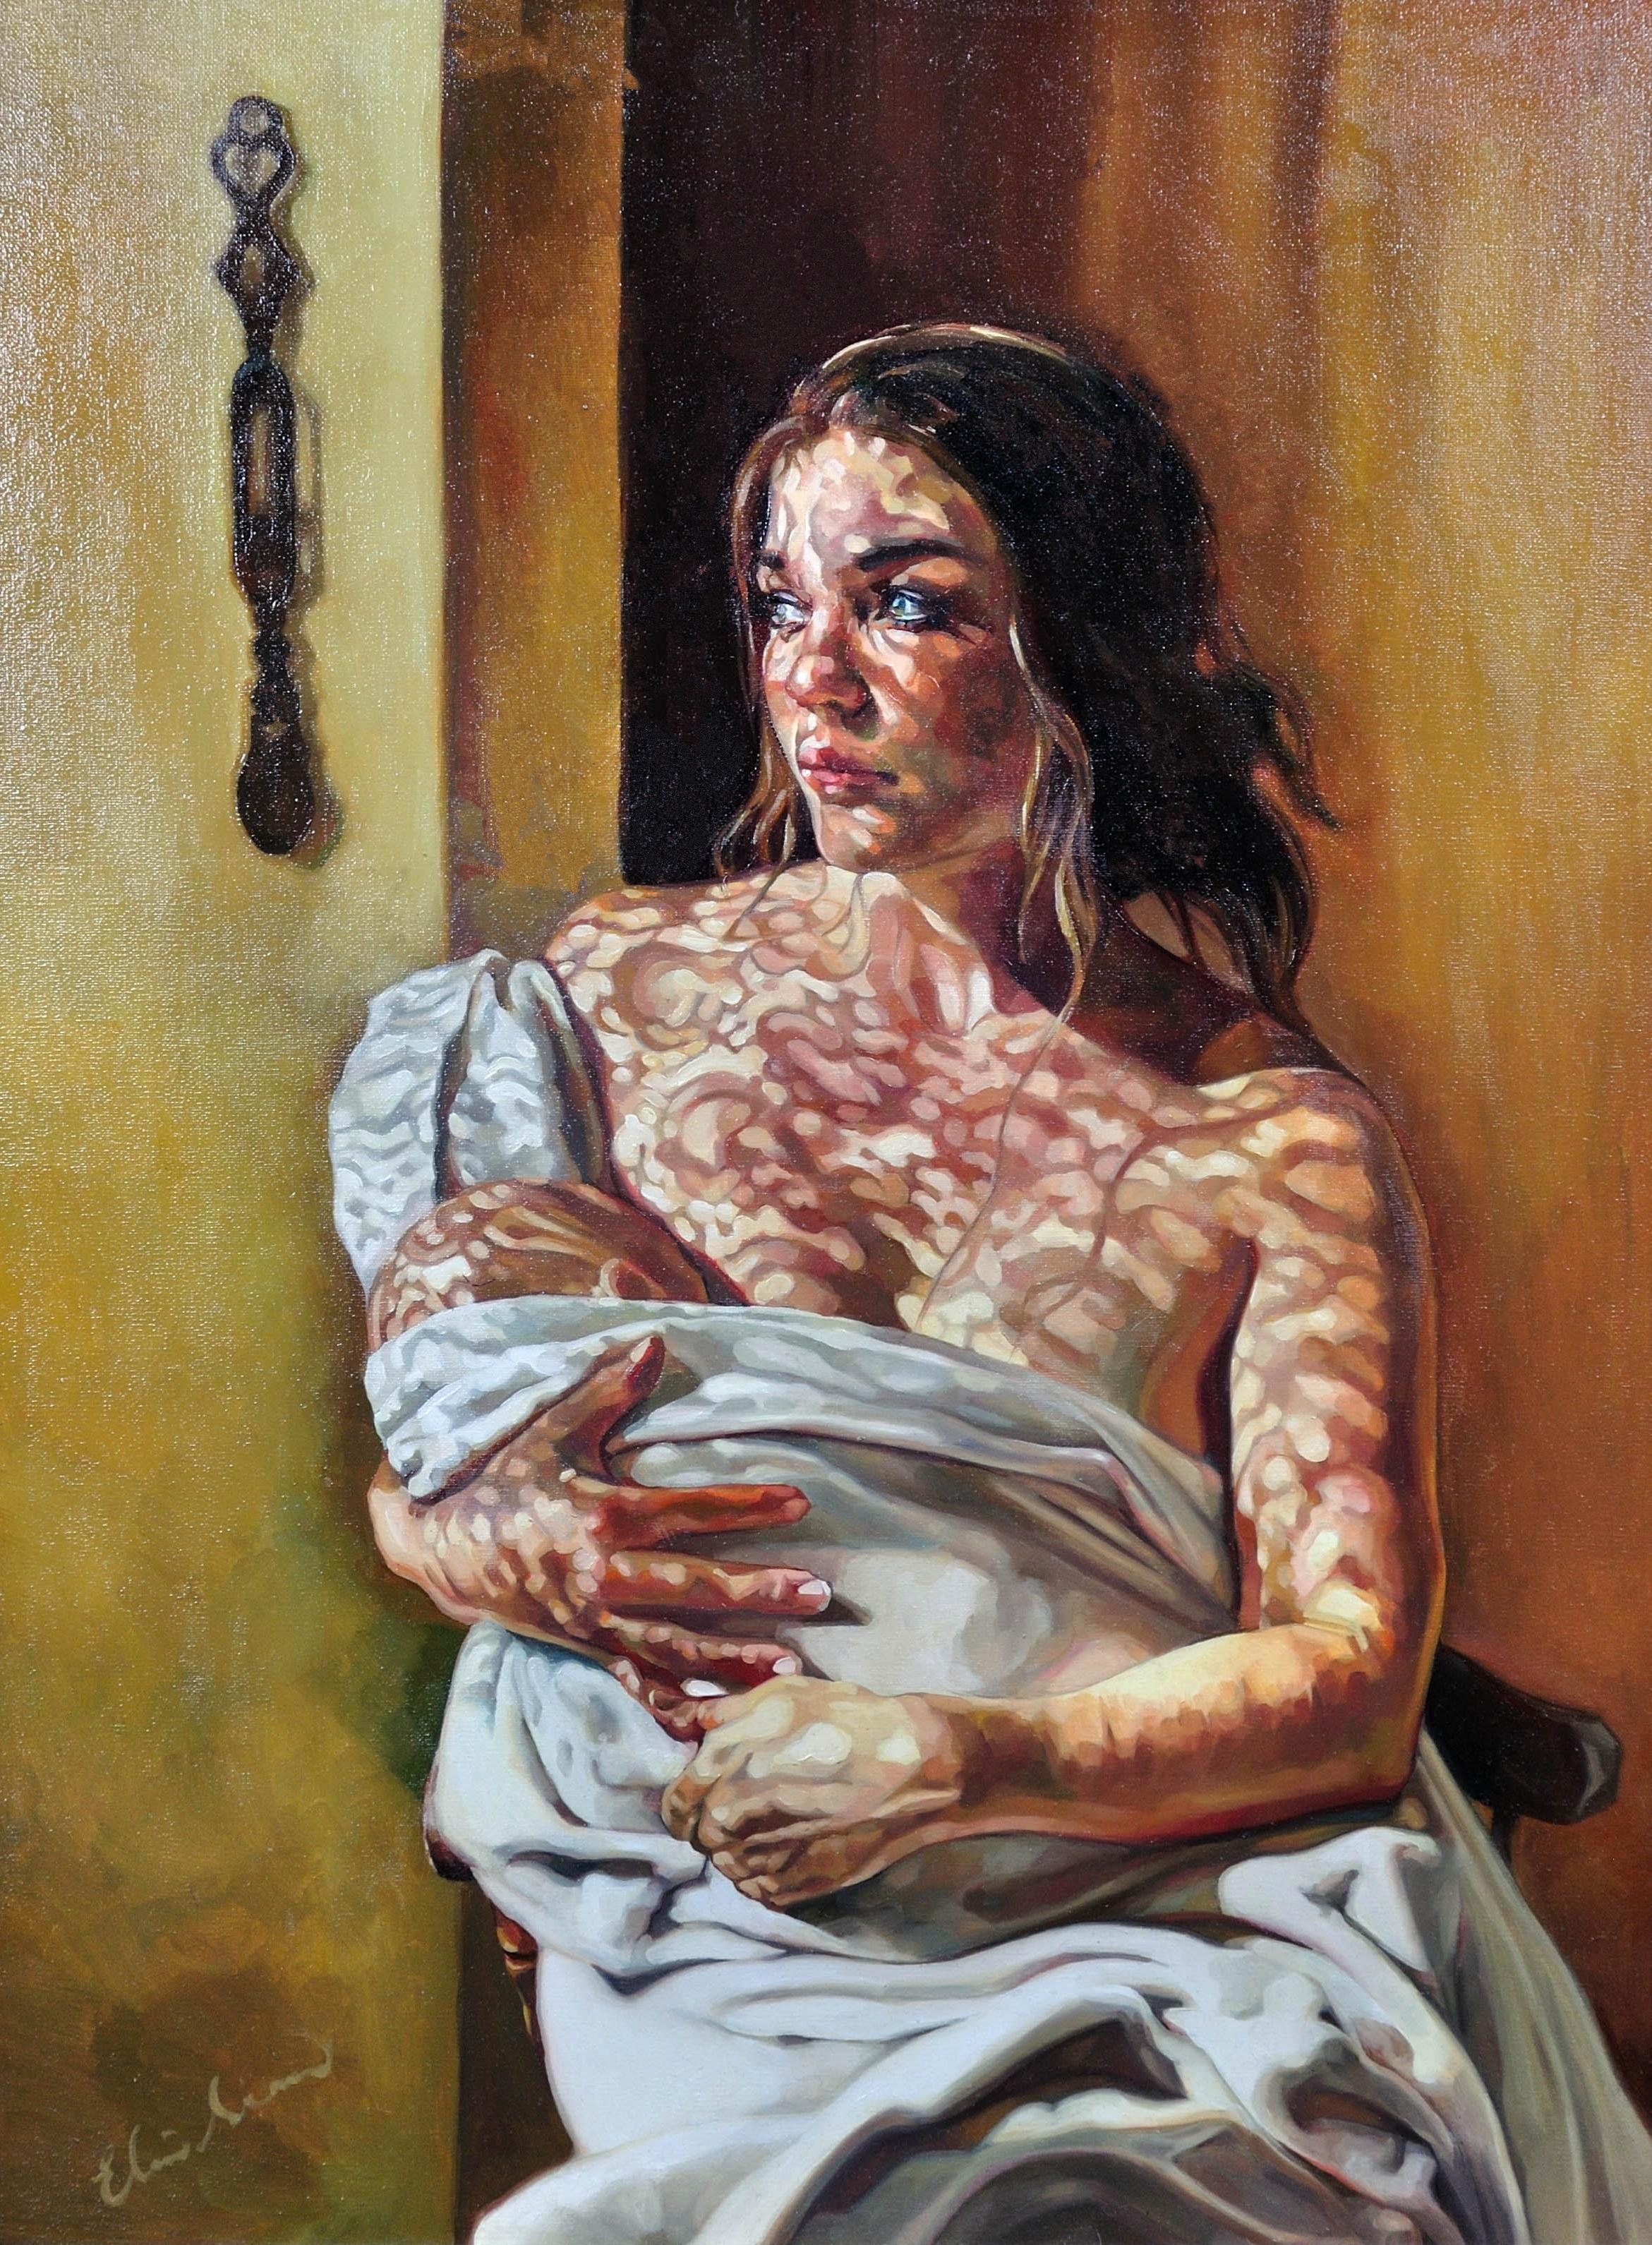 First Light. Mother & Baby. Welsh Blanket. Love Spoon. Maternal Love. - Painting by Elin Sian Blake